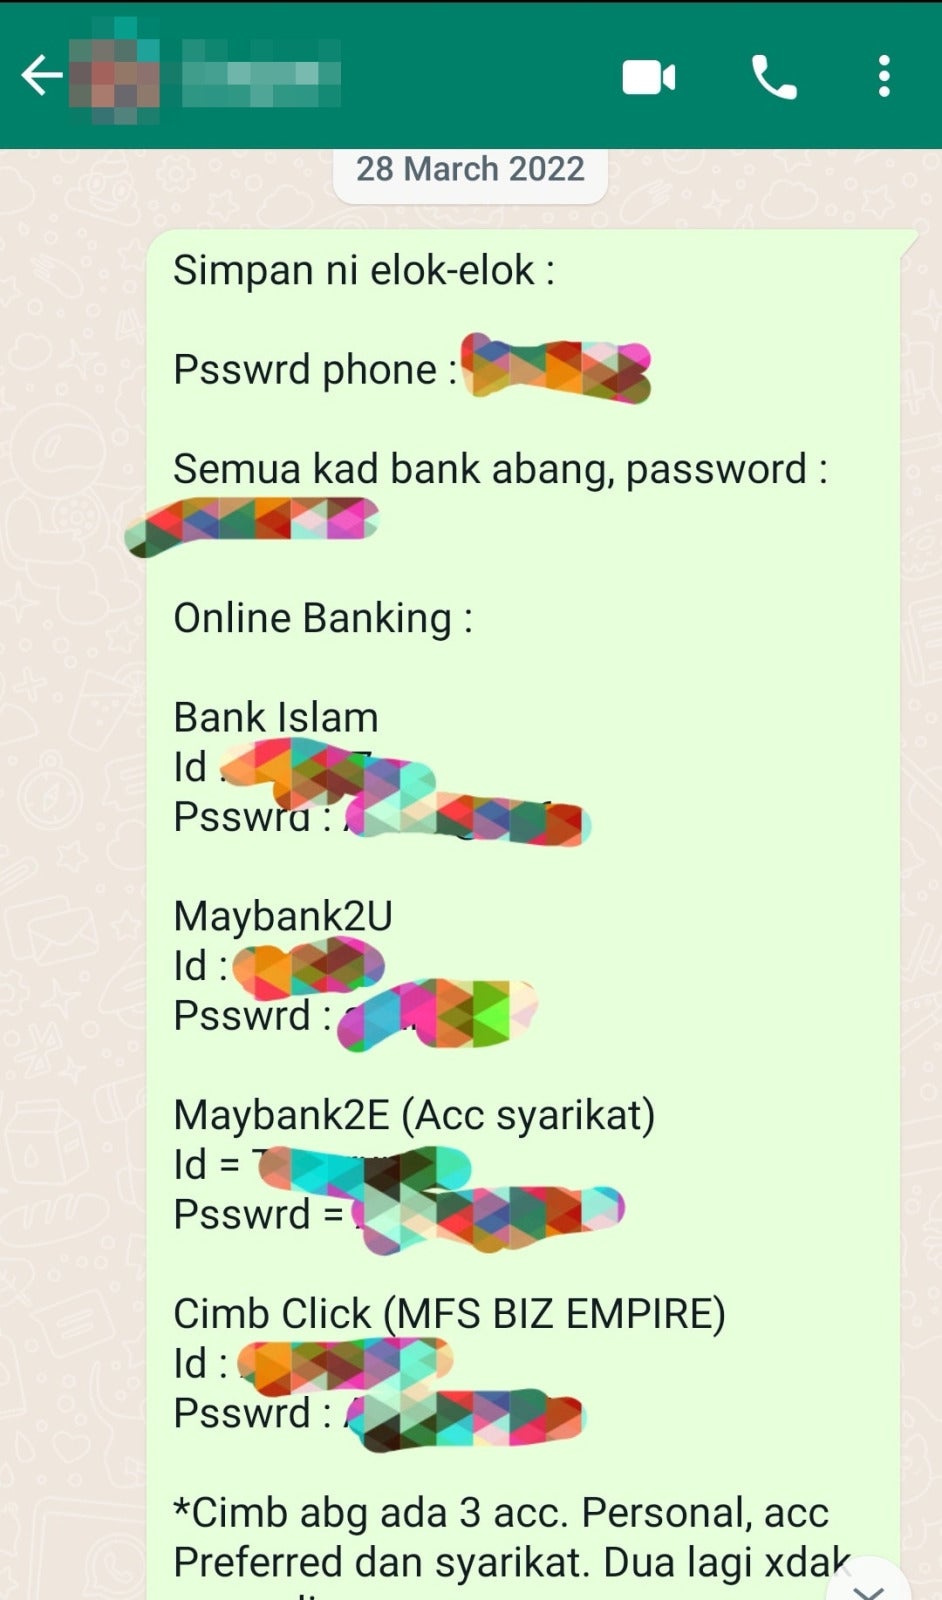 Msian man gives account passwords to wife trust